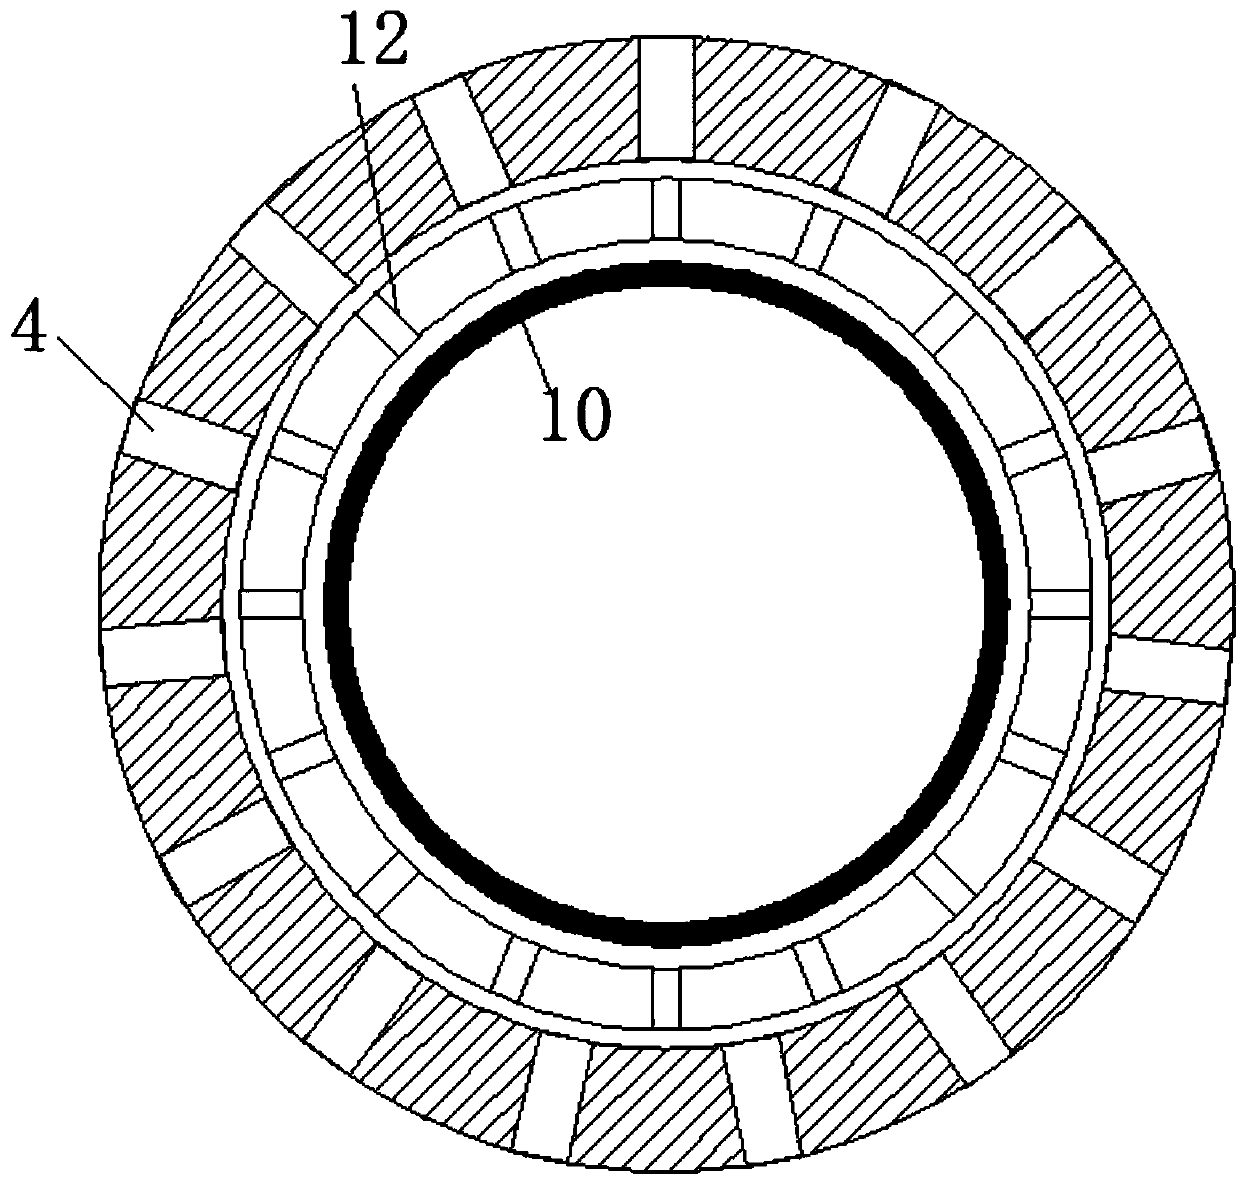 Squirrel-cage elastic support bearing capable of improving installation accuracy